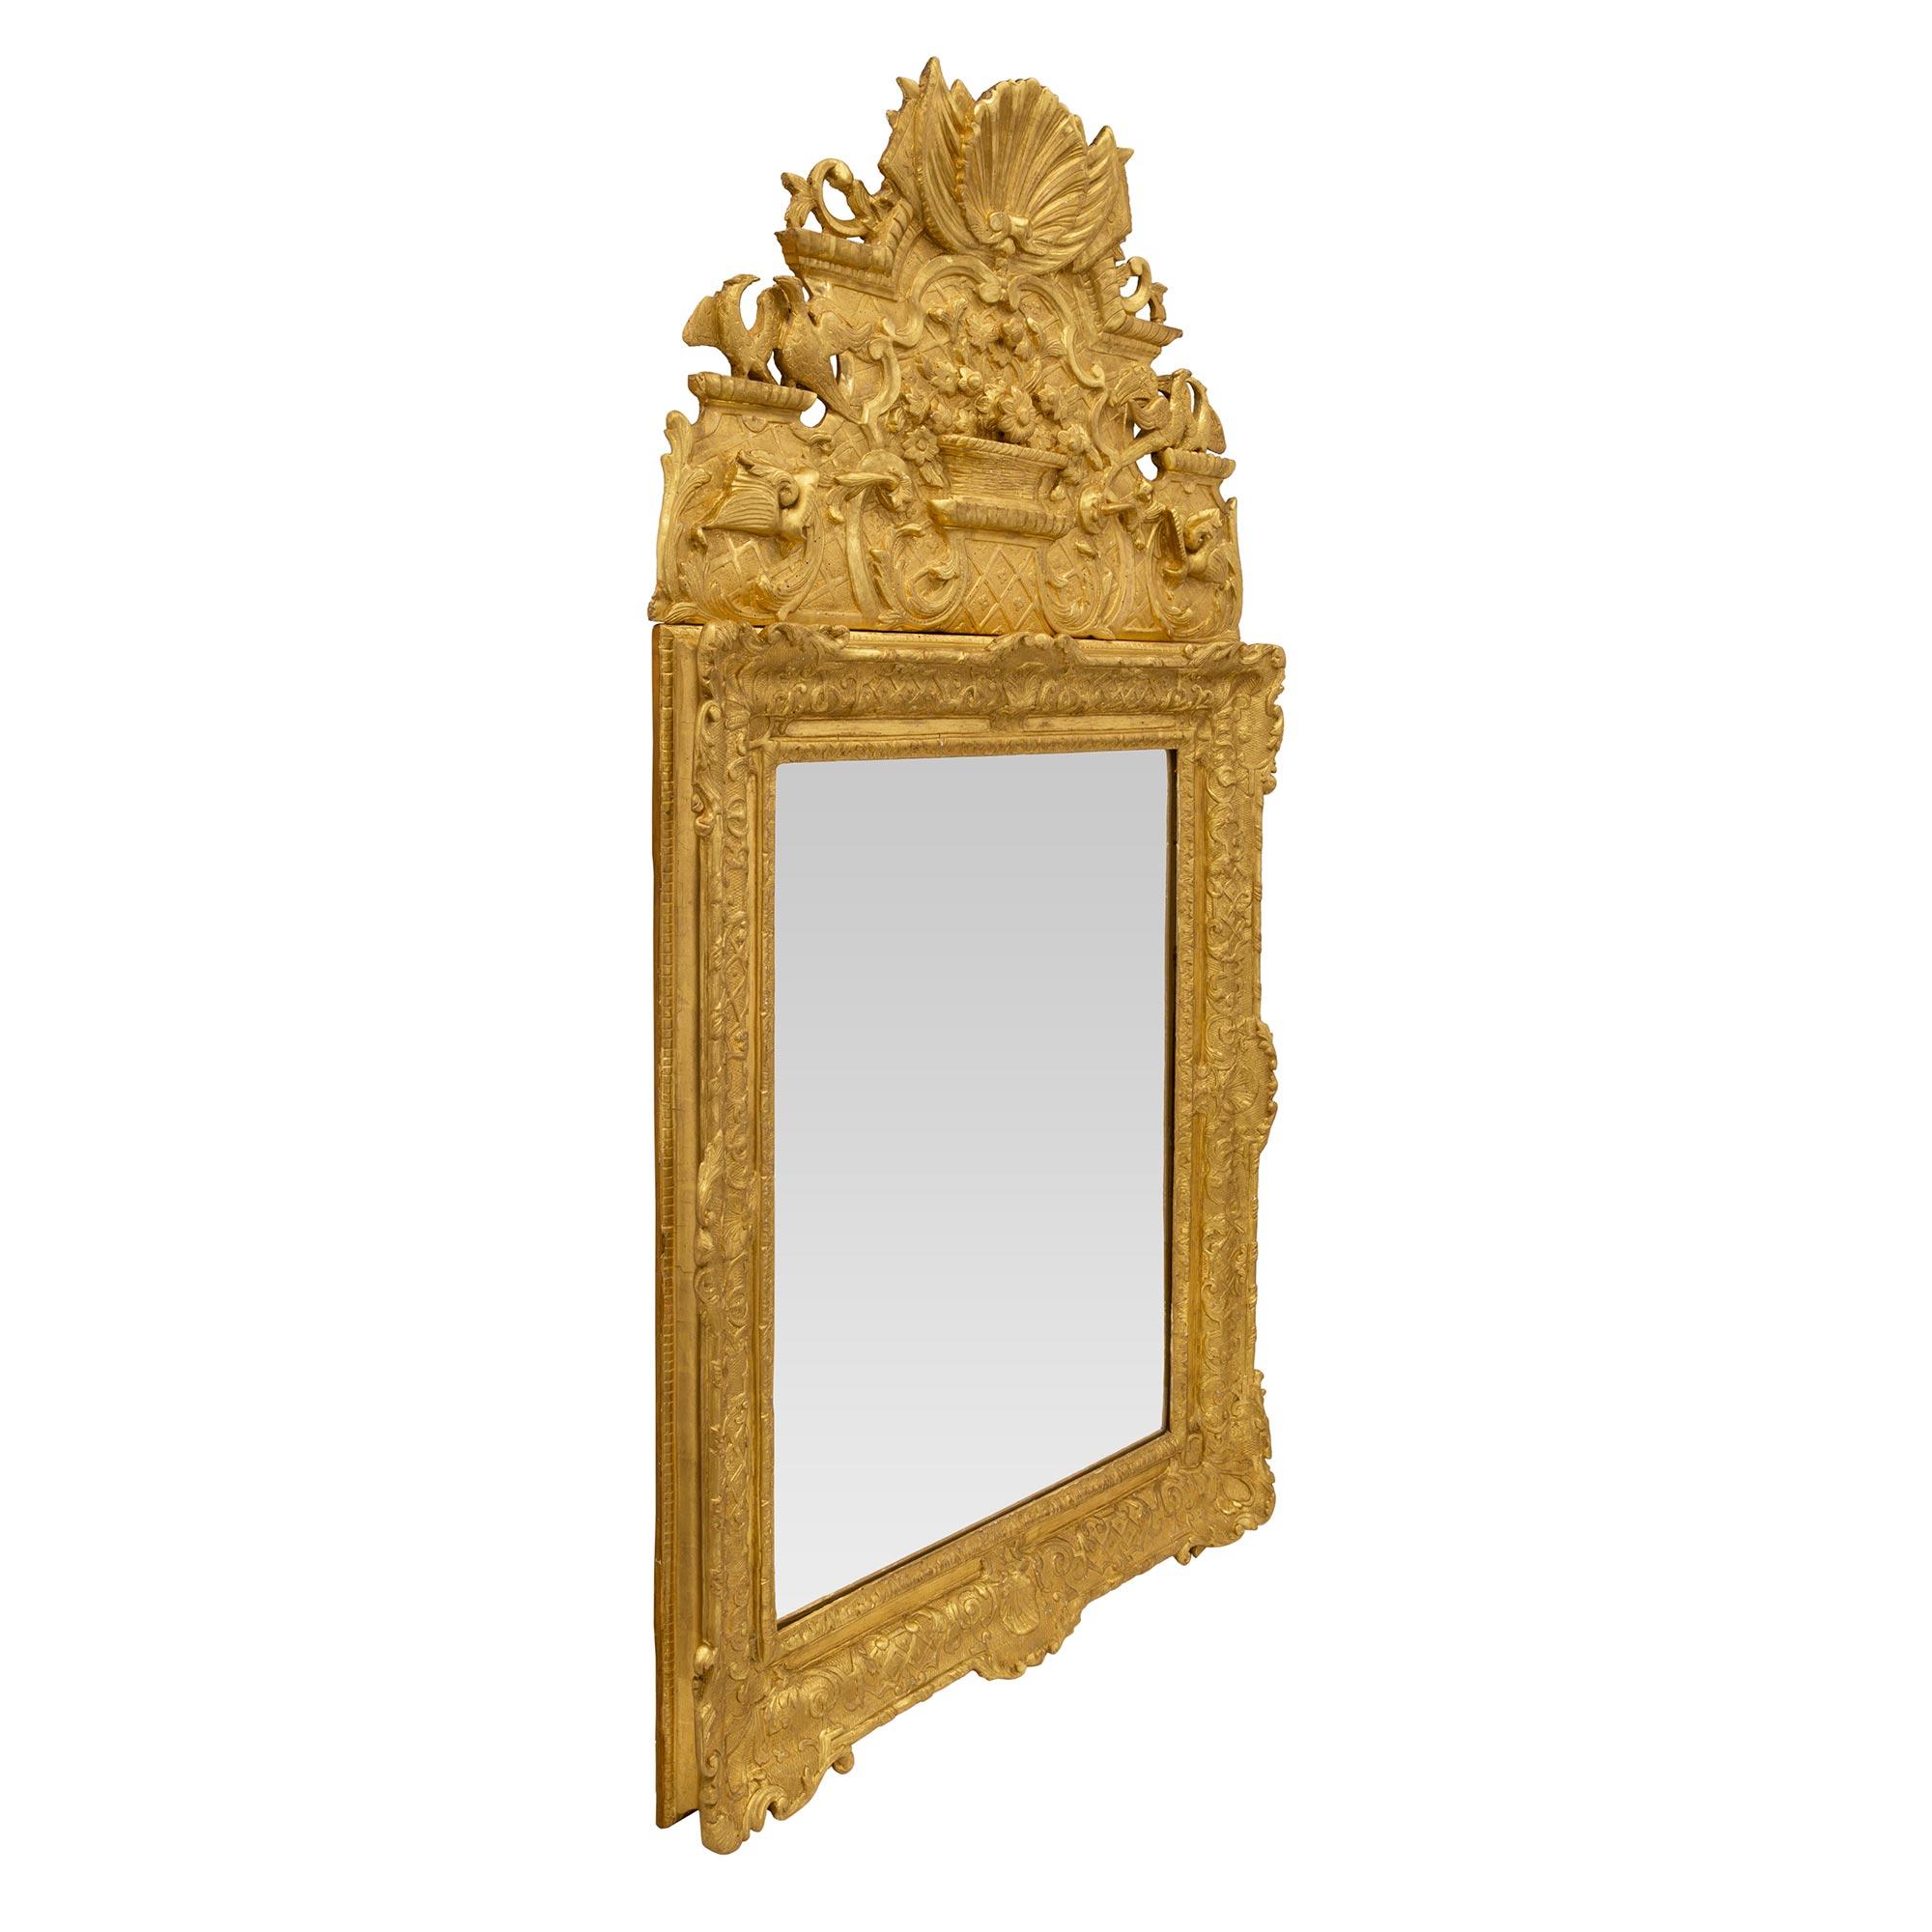 An exceptional French 18th century Regence period giltwood mirror. The original mirror plate is framed within a fine mottled foliate border. Richly carved seashells reserves and most decorative interlocking designs extend throughout the frame and